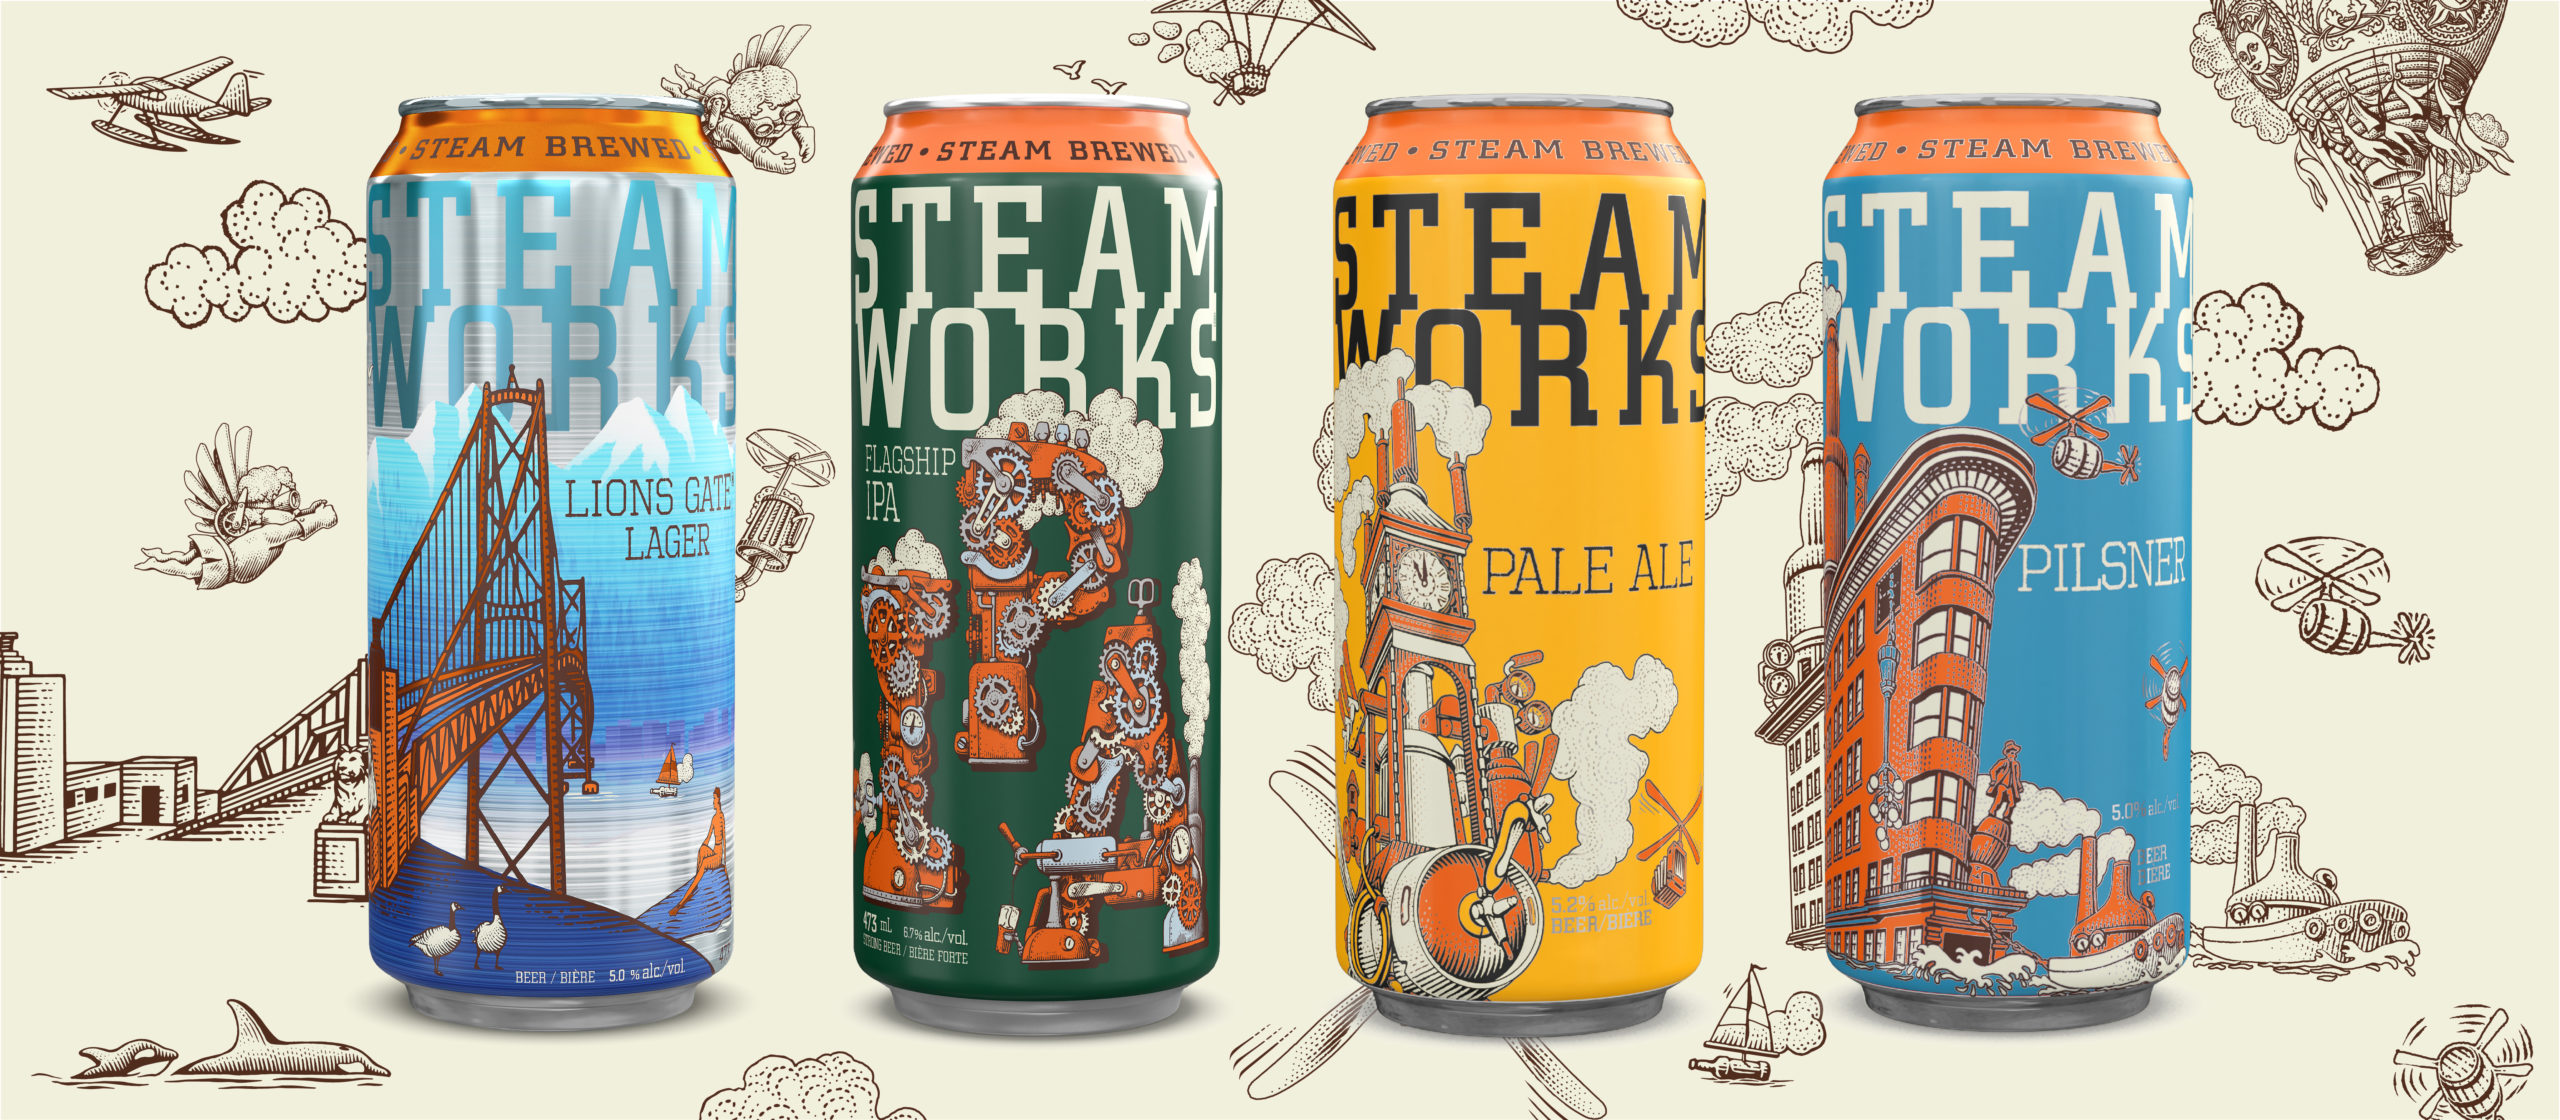 Our Beer - Steamworks Brewing